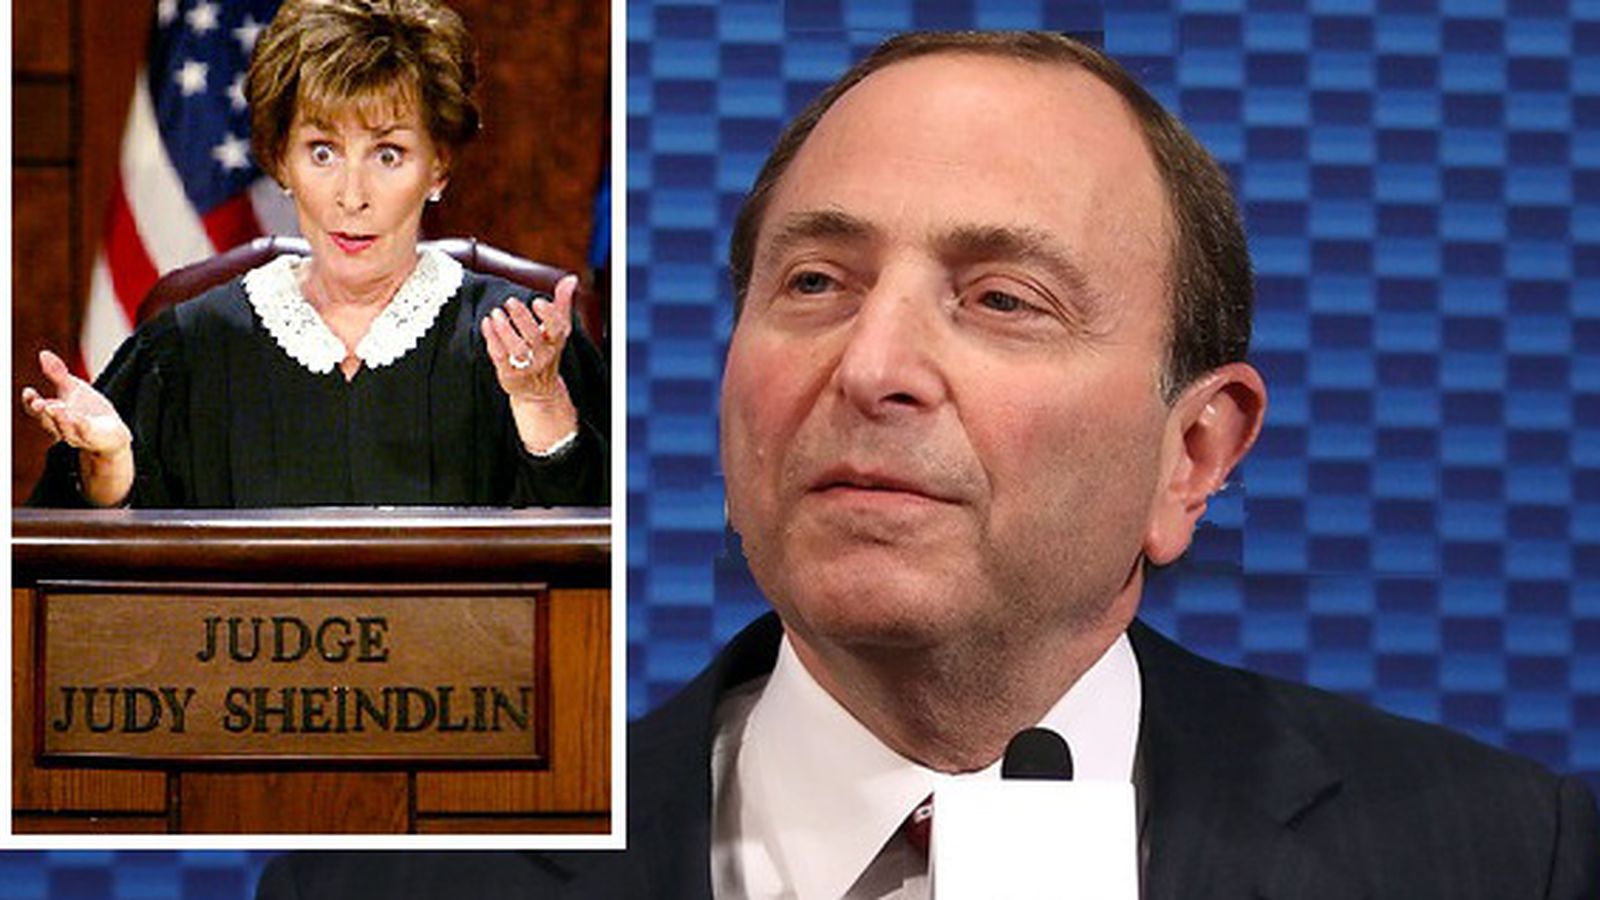 Not even an appearance on Judge Judy could bridge the gap between the NHL a...